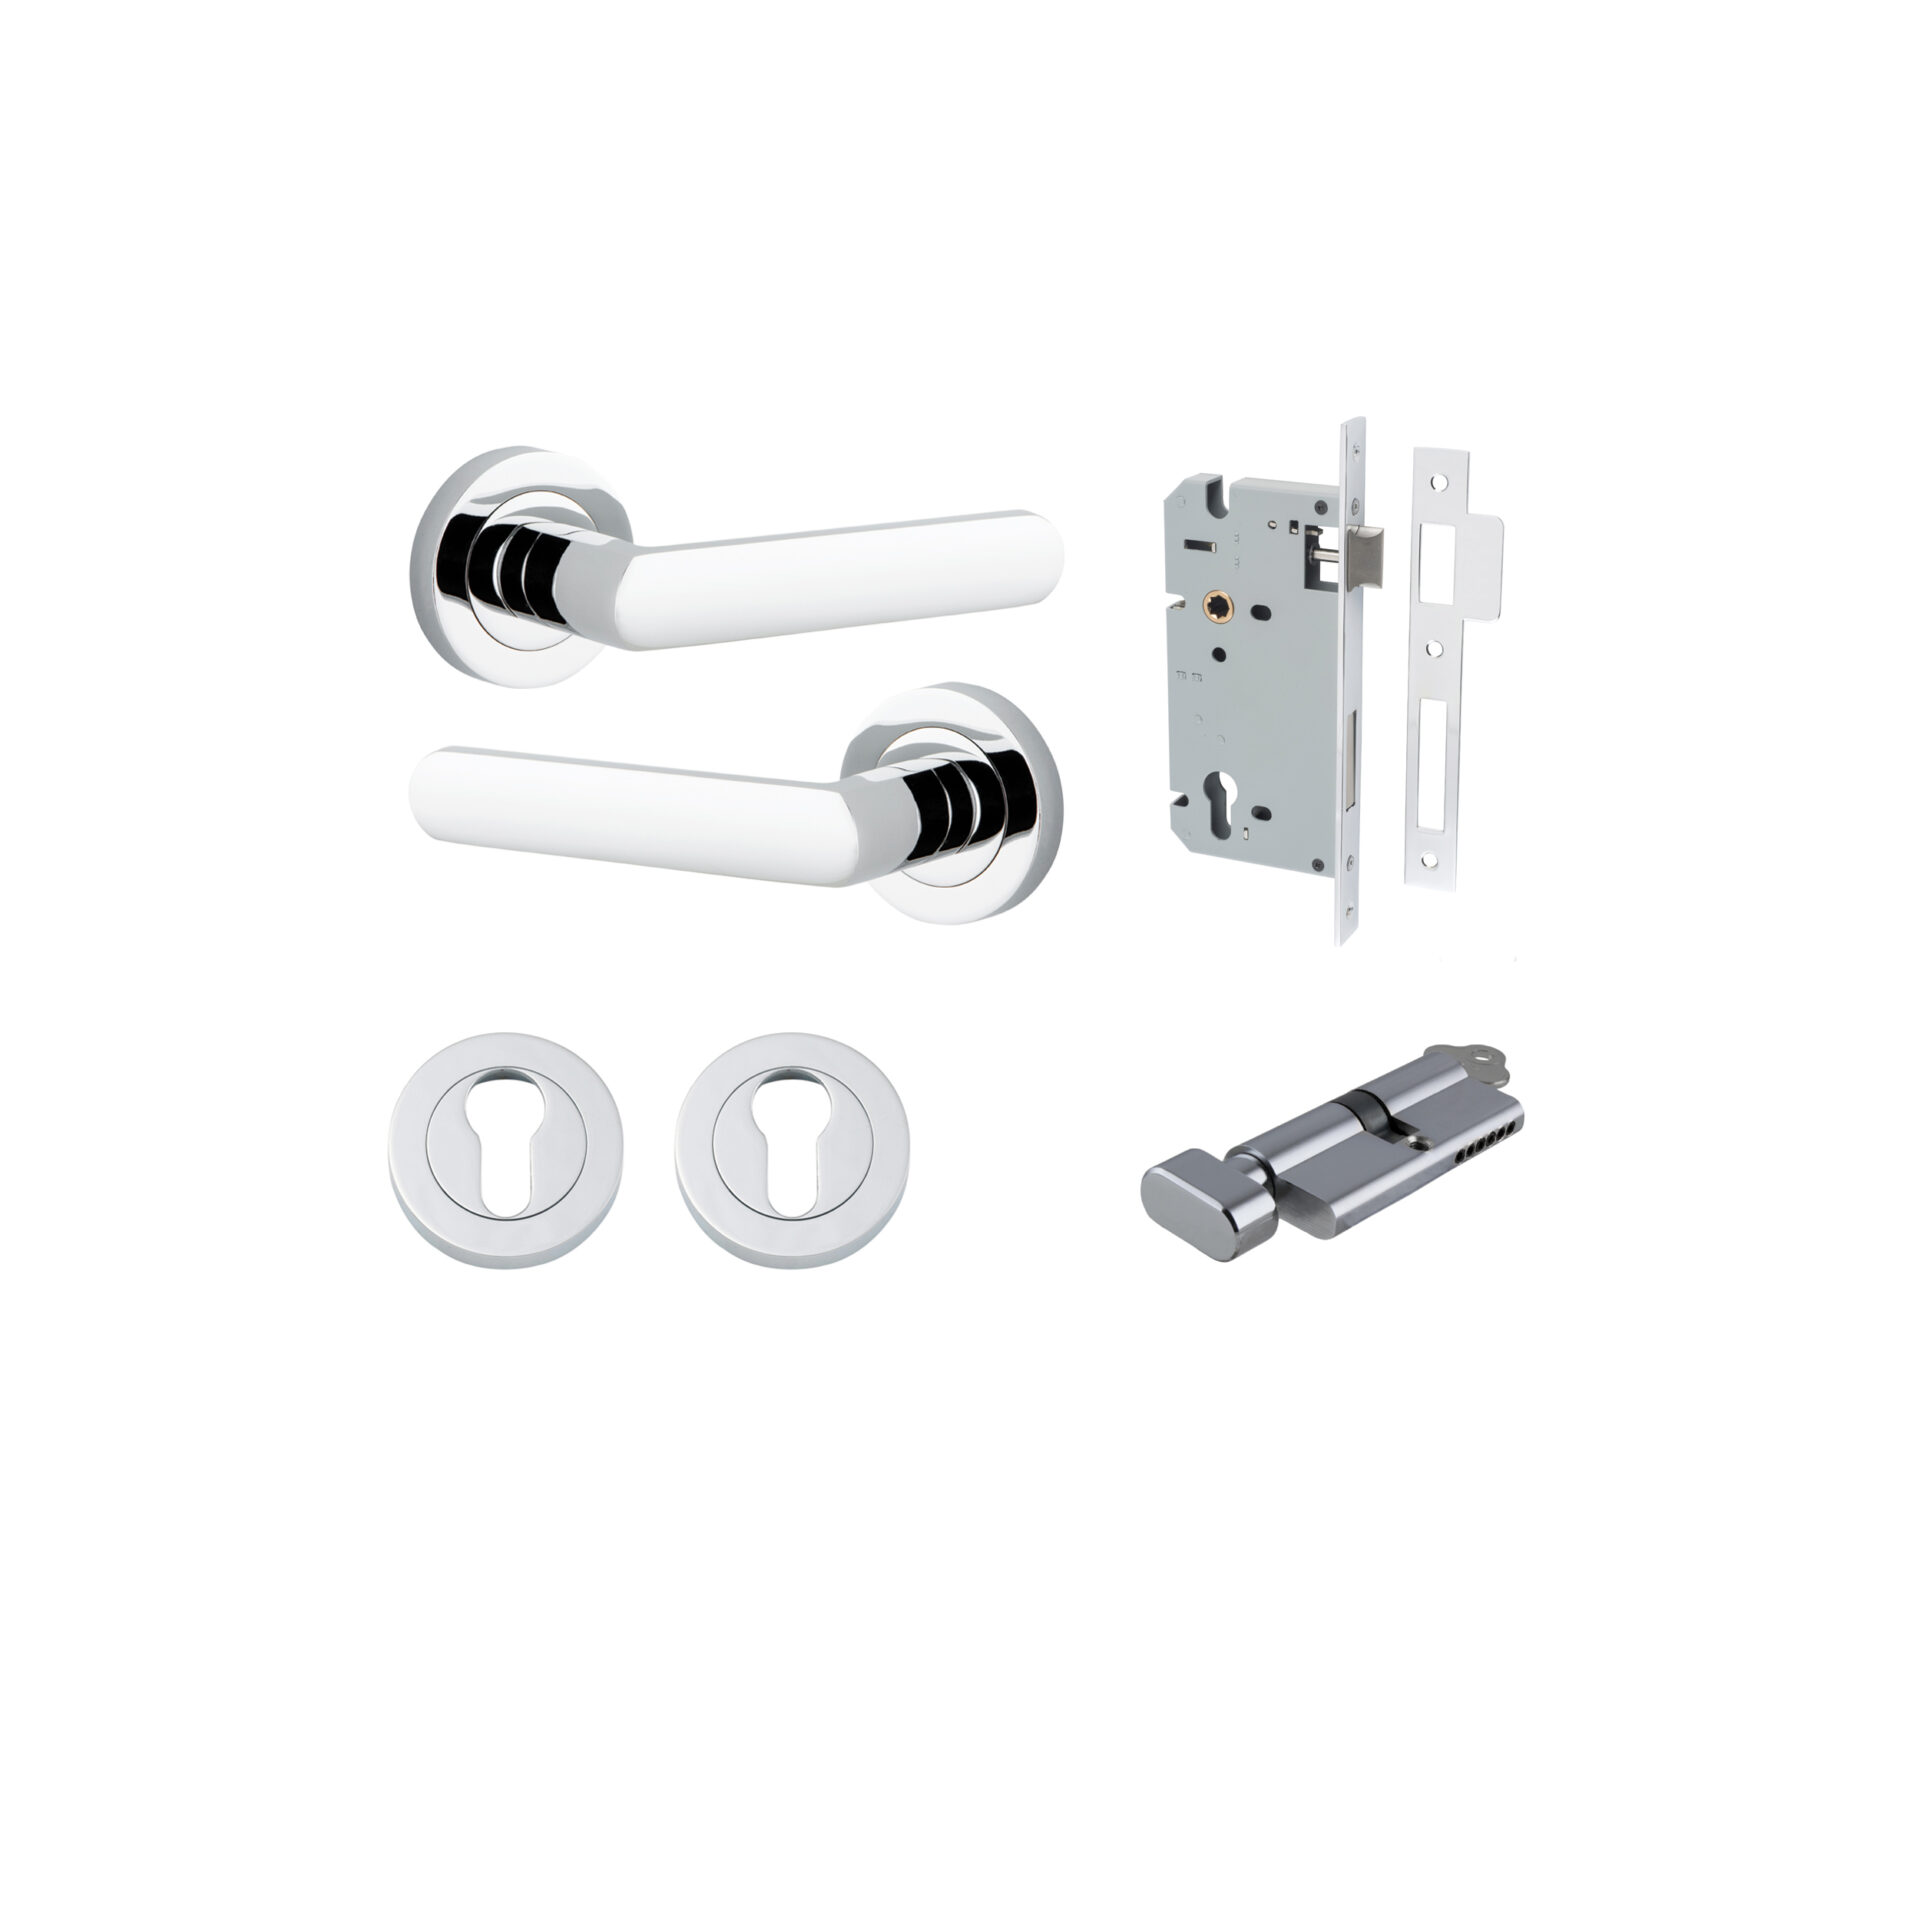 Osaka Lever - Round Rose Entrance Kit with Separate High Security Lock